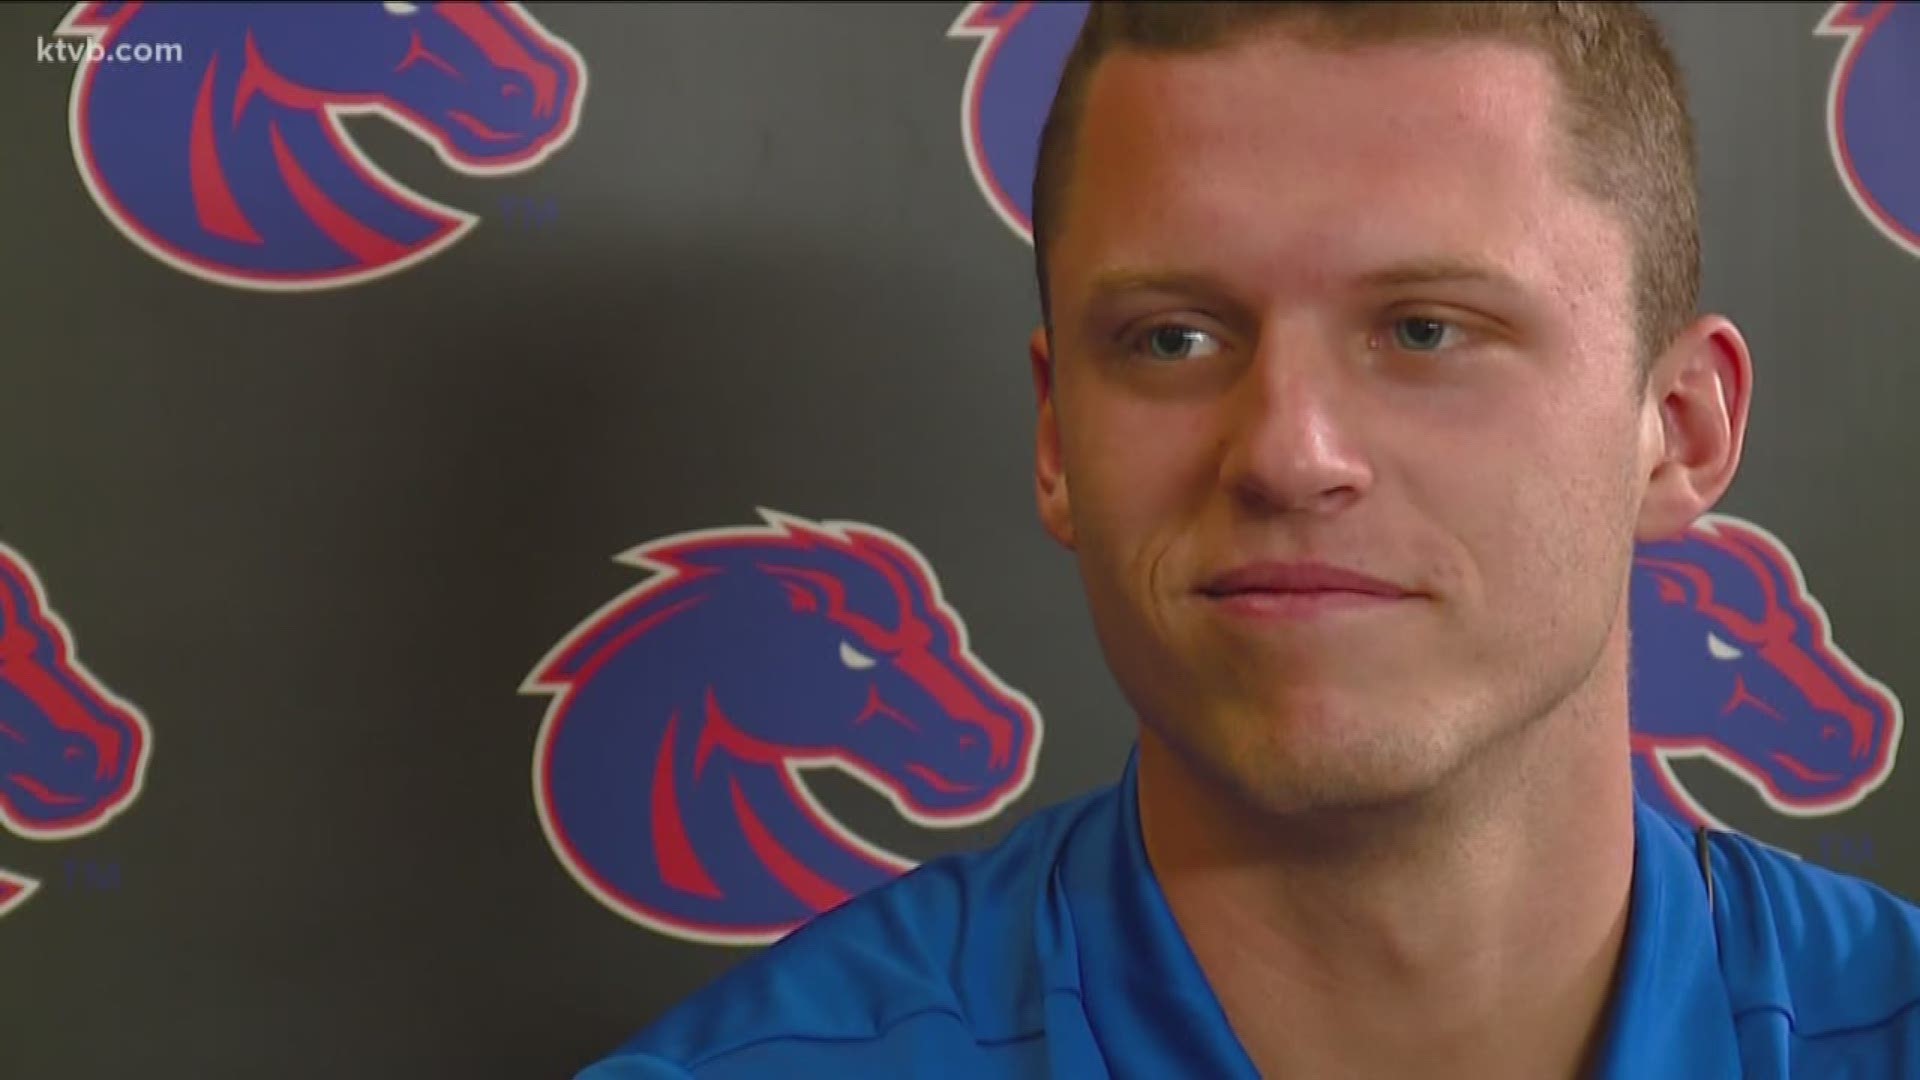 The Boise State football team has been picked to win the Mountain Division, plus other news.